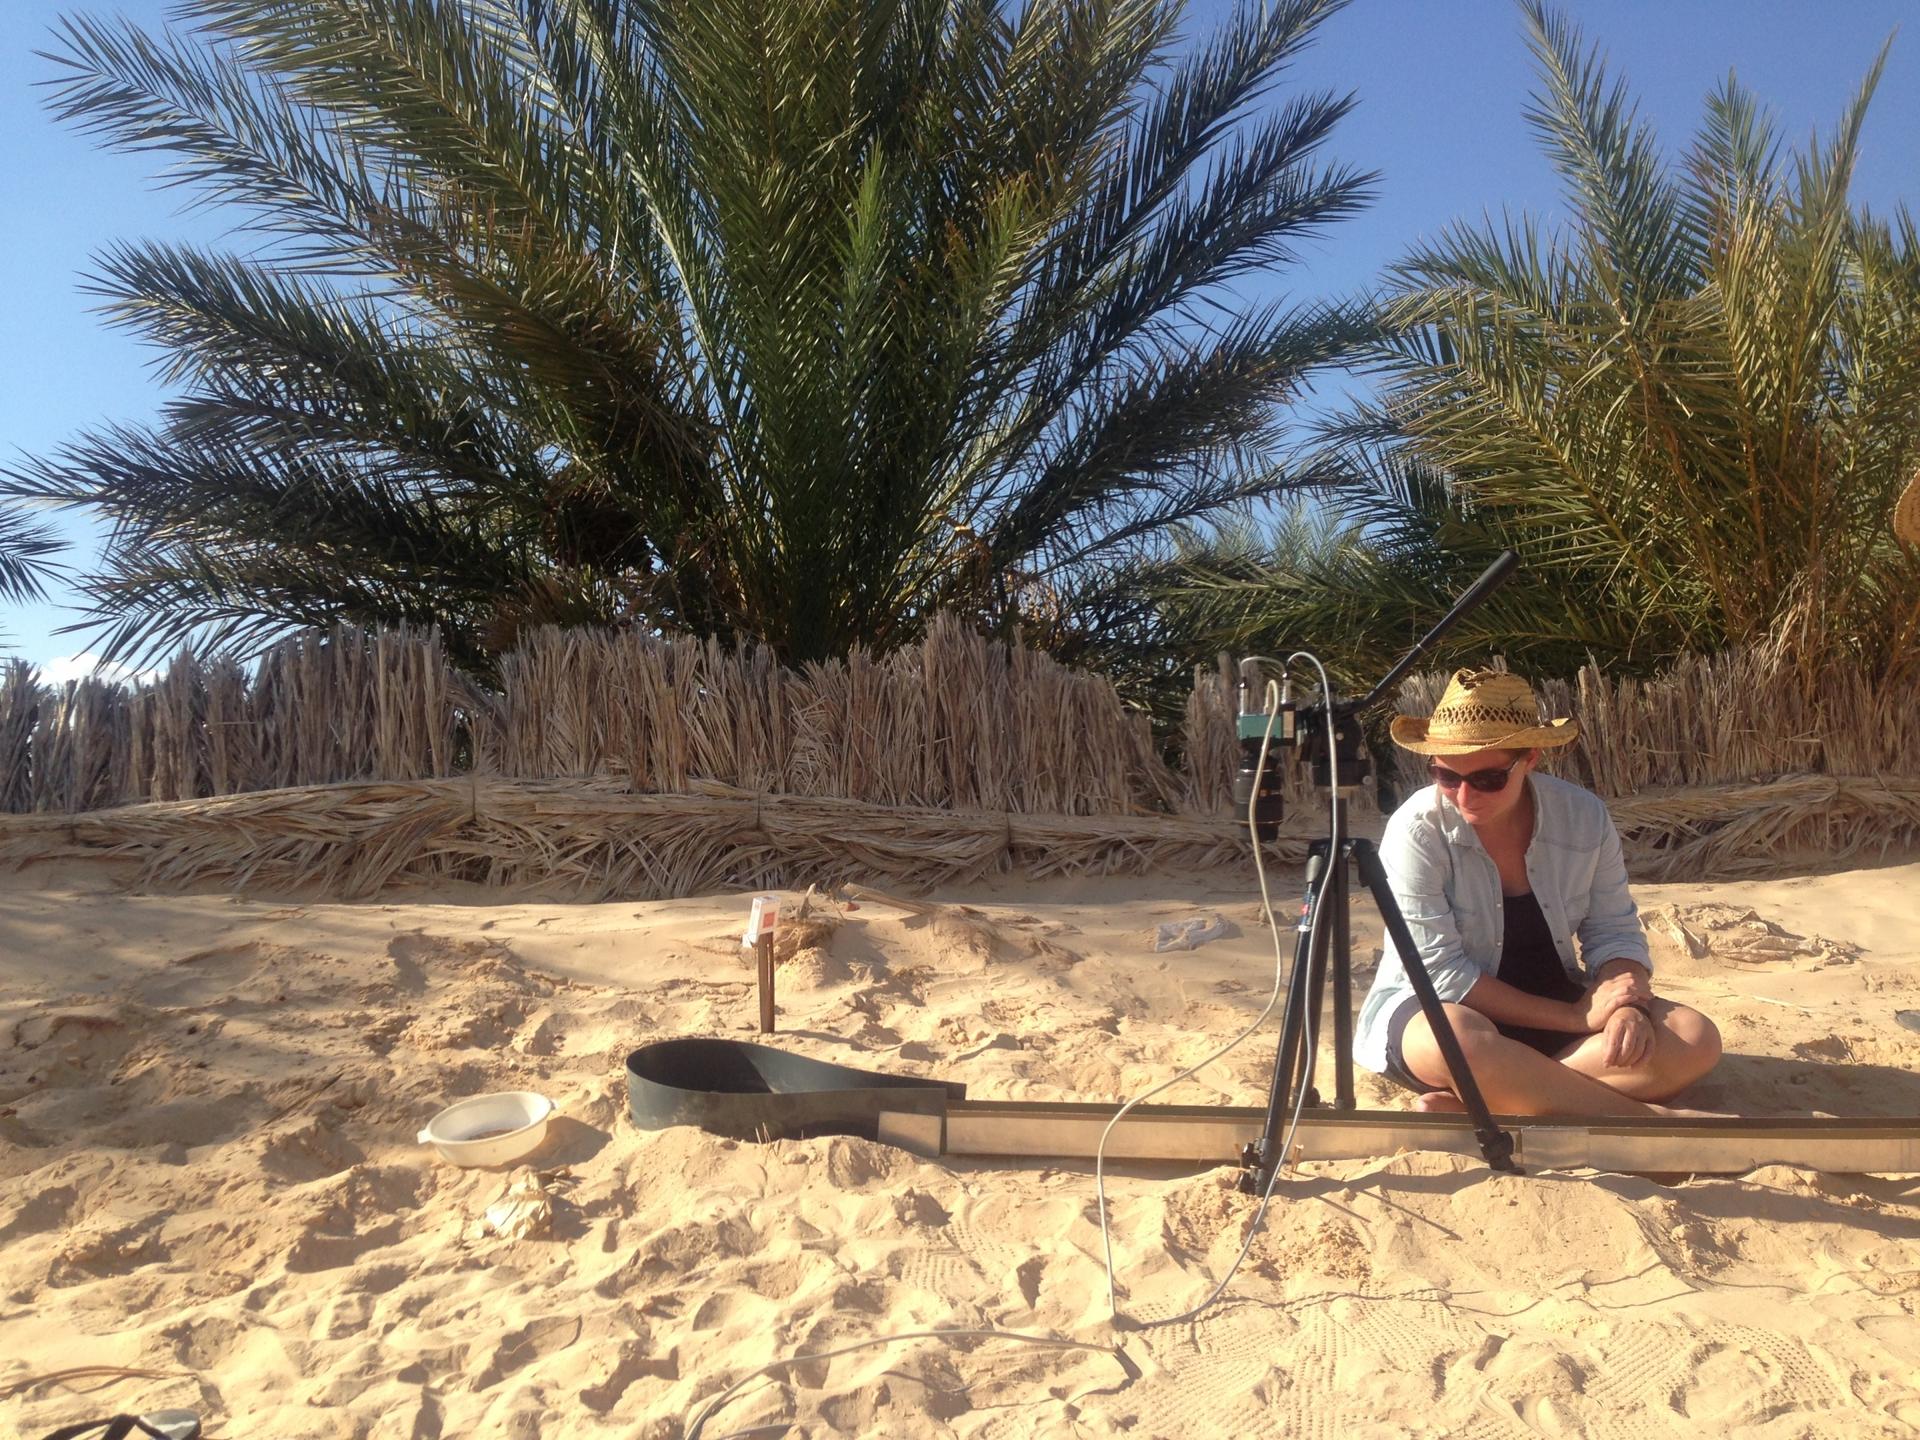 A person wearing a sun hat sets up a metal contraption in the sand. 